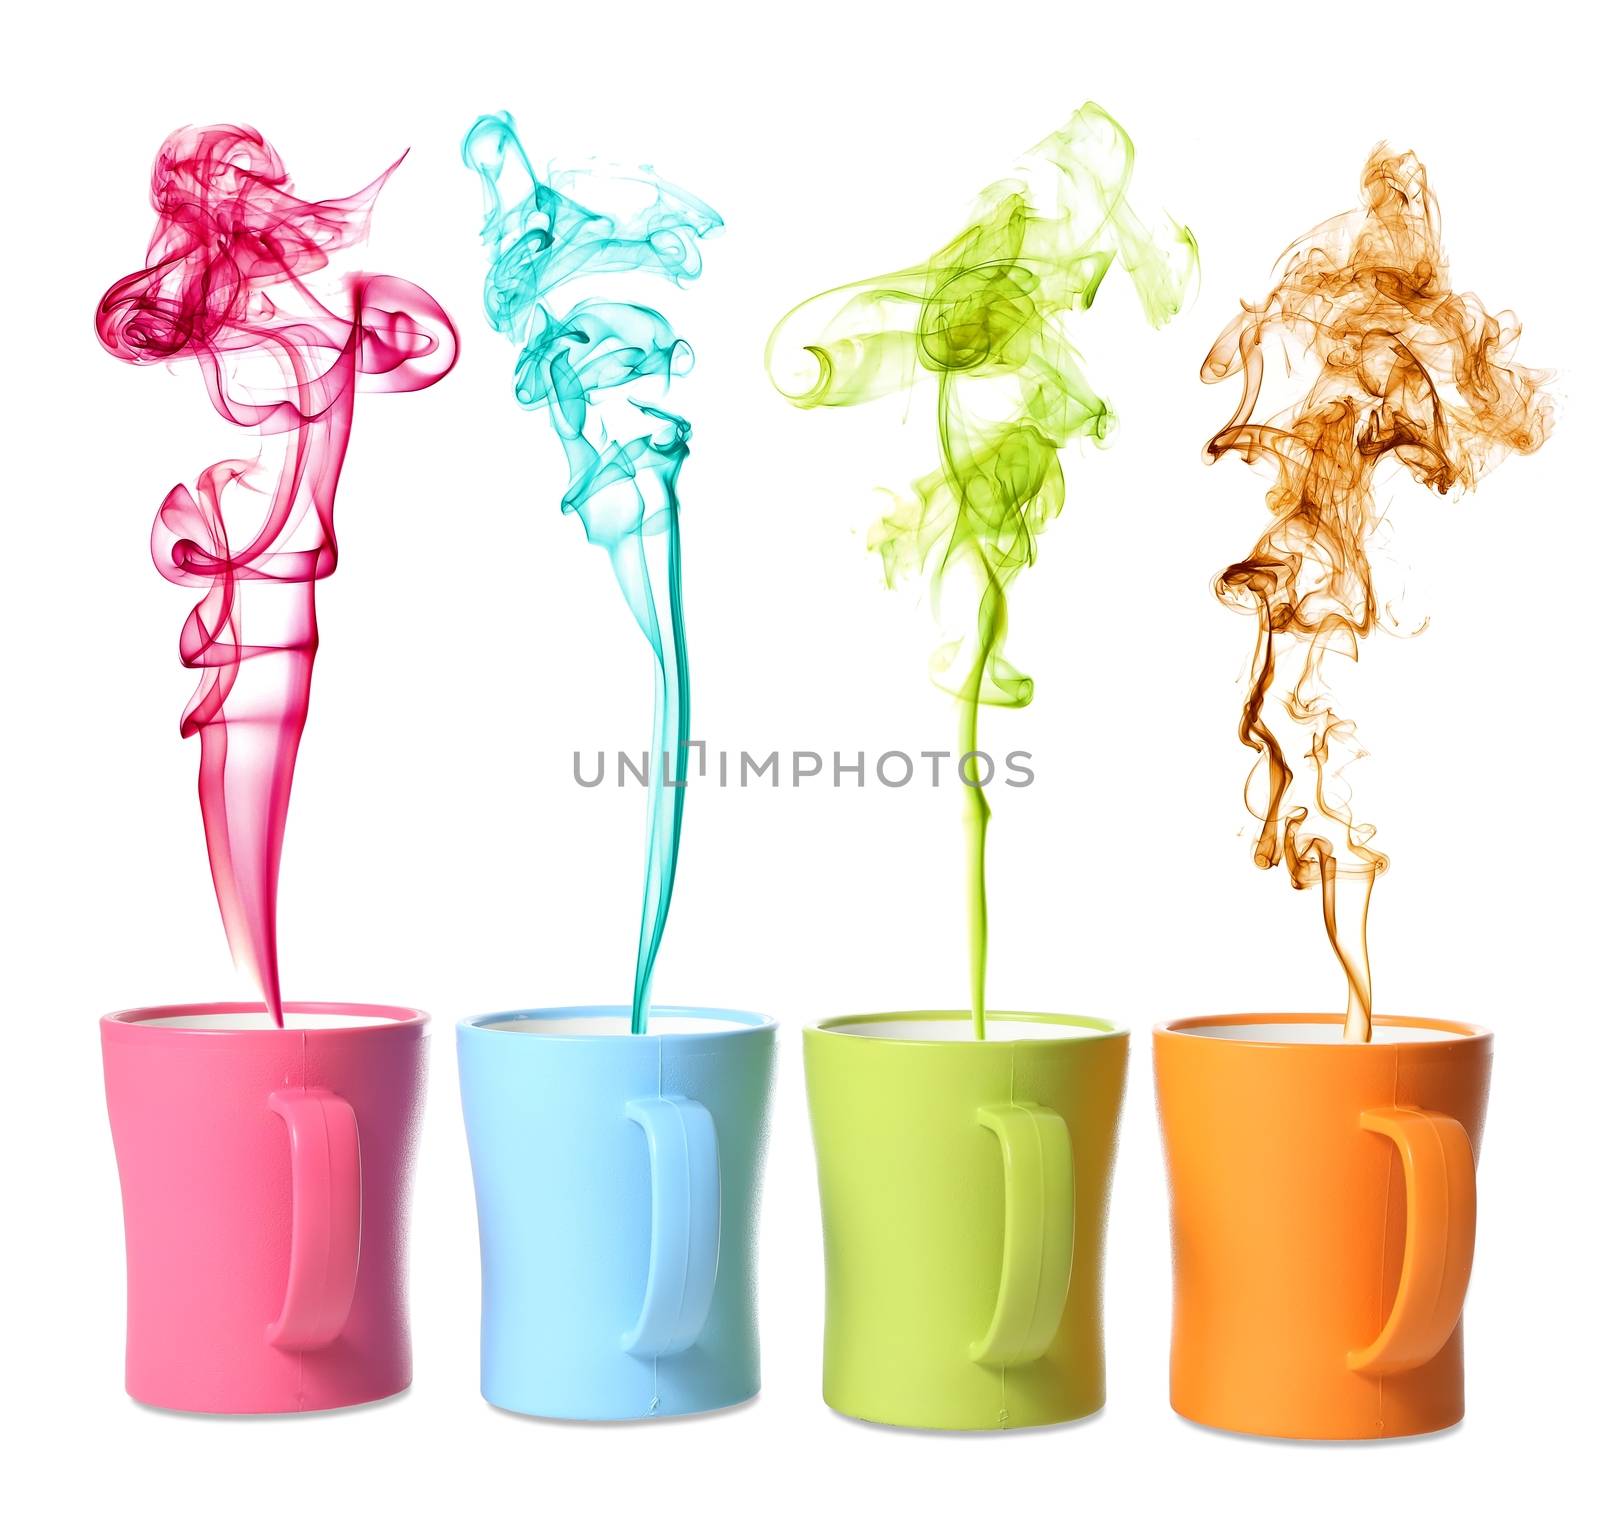 Coffee or Tea Mugs with color steam by fouroaks